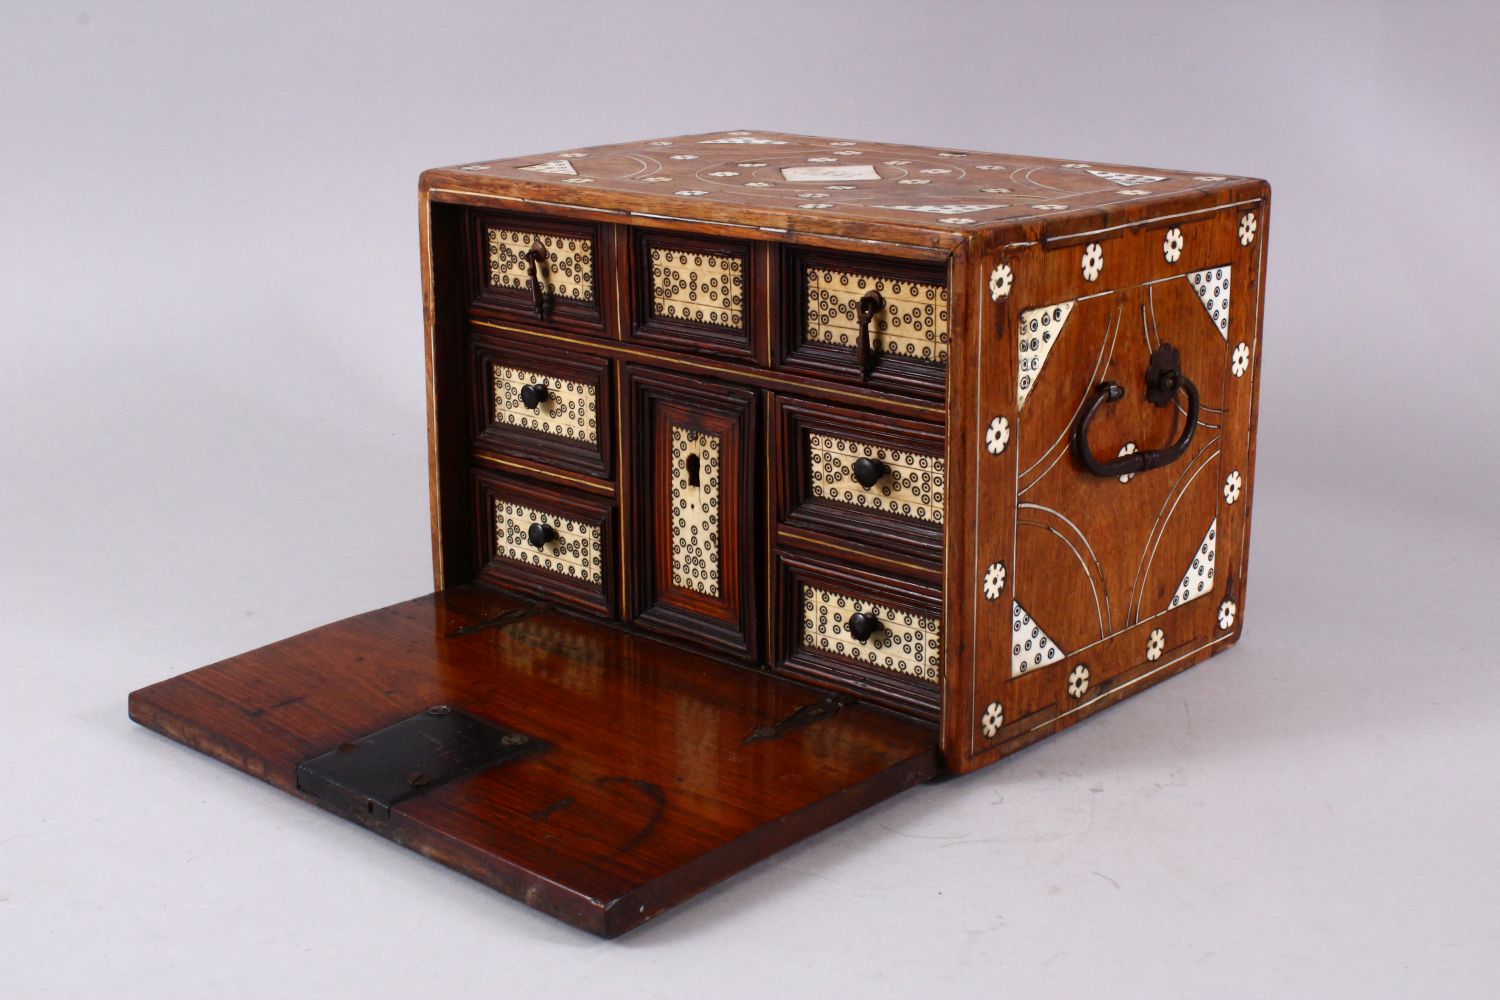 A LATE 16TH / EARLY 17TH CENTURY INDO PORTUGUESE BONE & IVORY INLAID BOX, the box with inlaid flower - Image 3 of 8